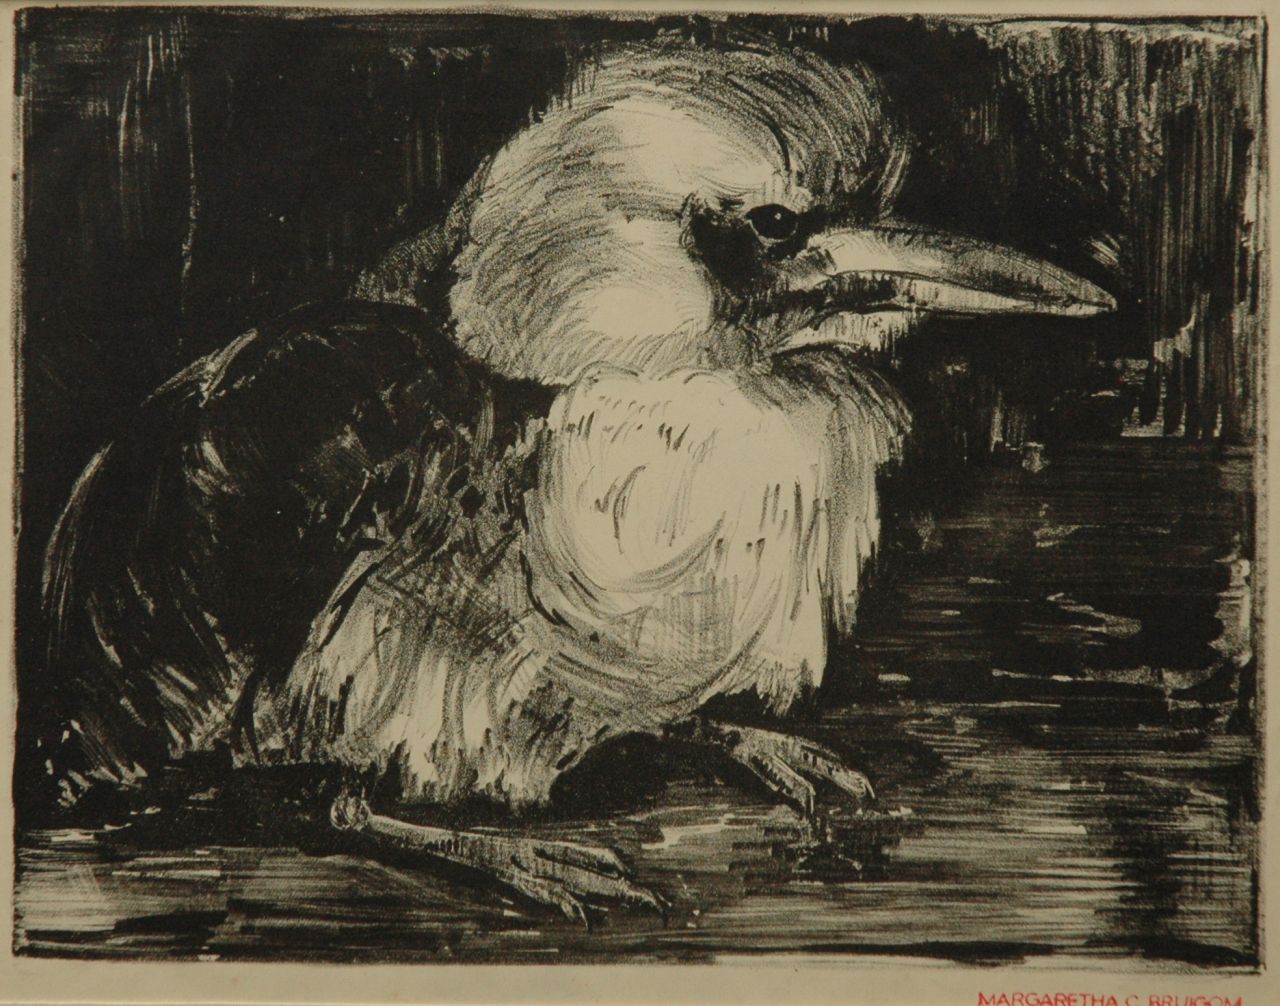 Bruigom M.C.  | Margaretha Cornelia 'Greta' Bruigom | Prints and Multiples offered for sale | A young bird, lithograph 22.7 x 29.4 cm, signed l.r. with the artist's stamp